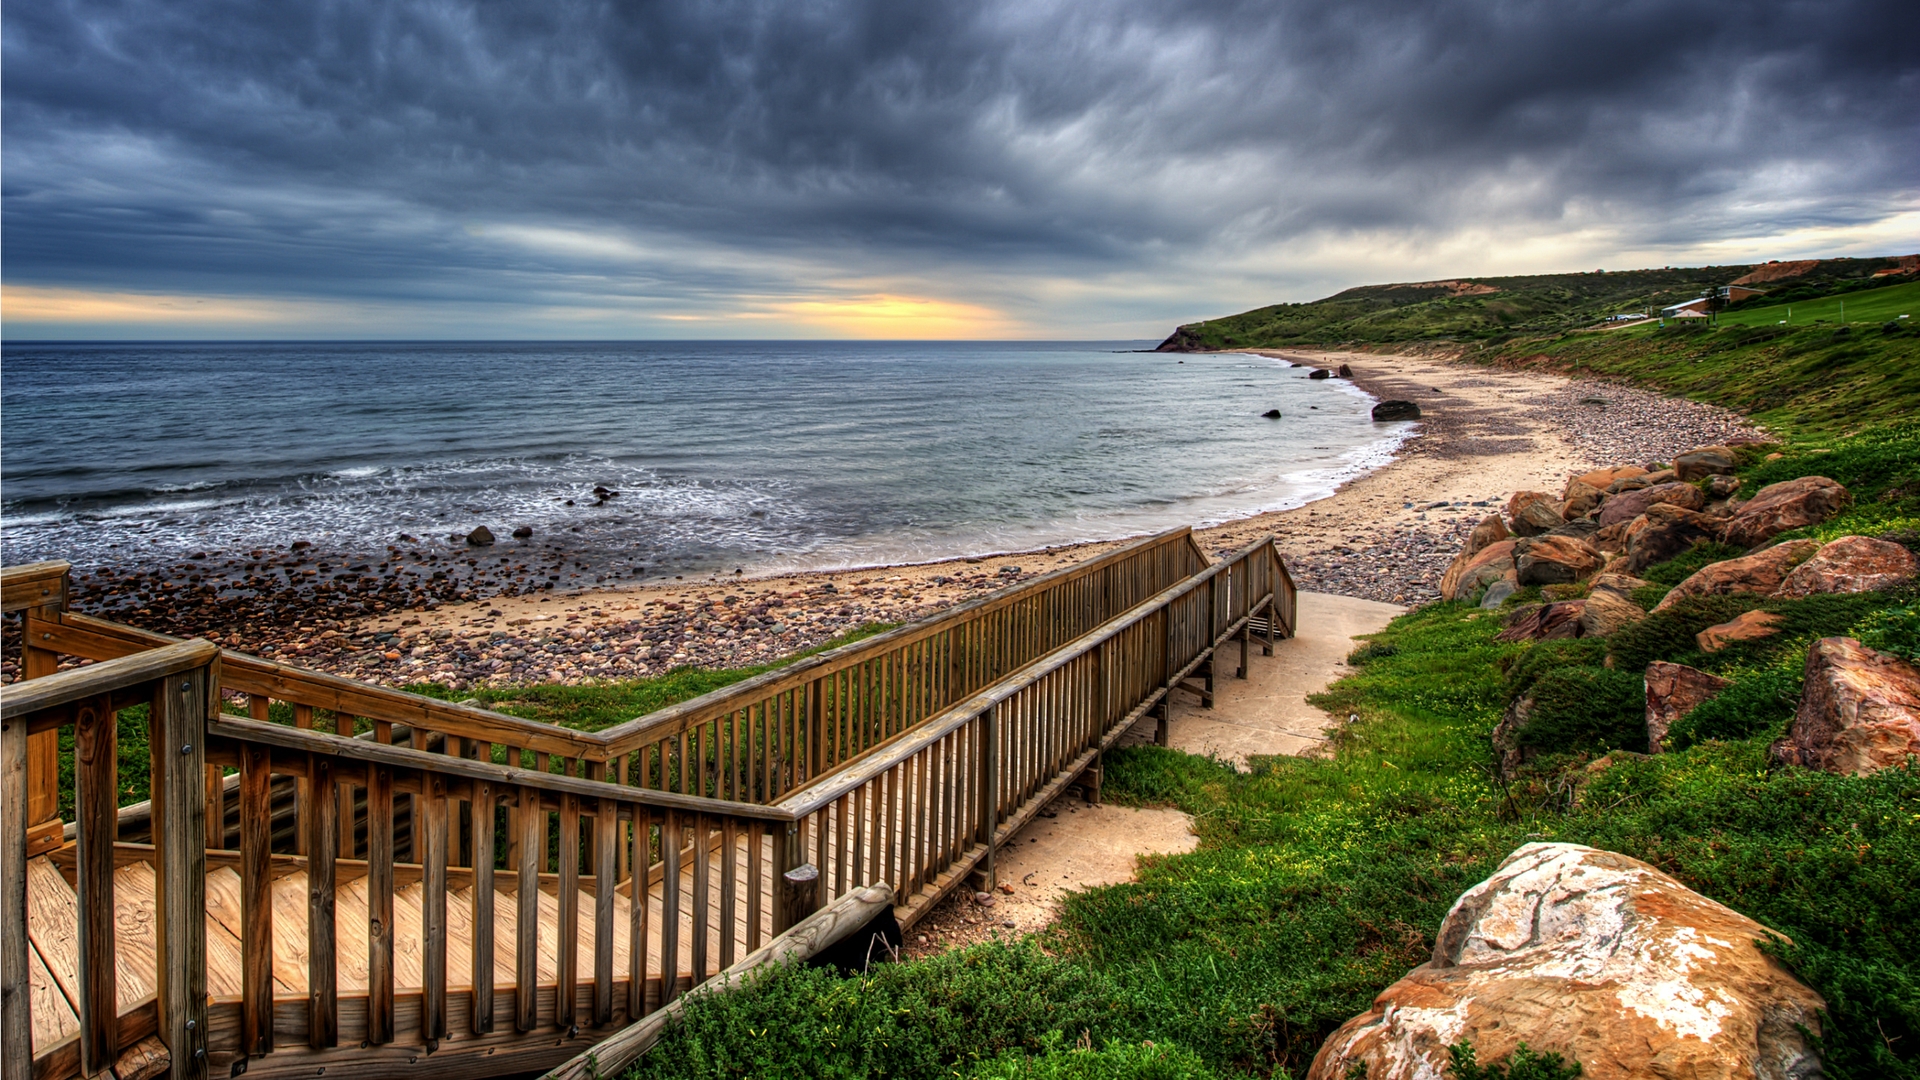 HDR Nature-nature-landscapes_hdwallpaper_wooden-walkway-beach-hdr_2090